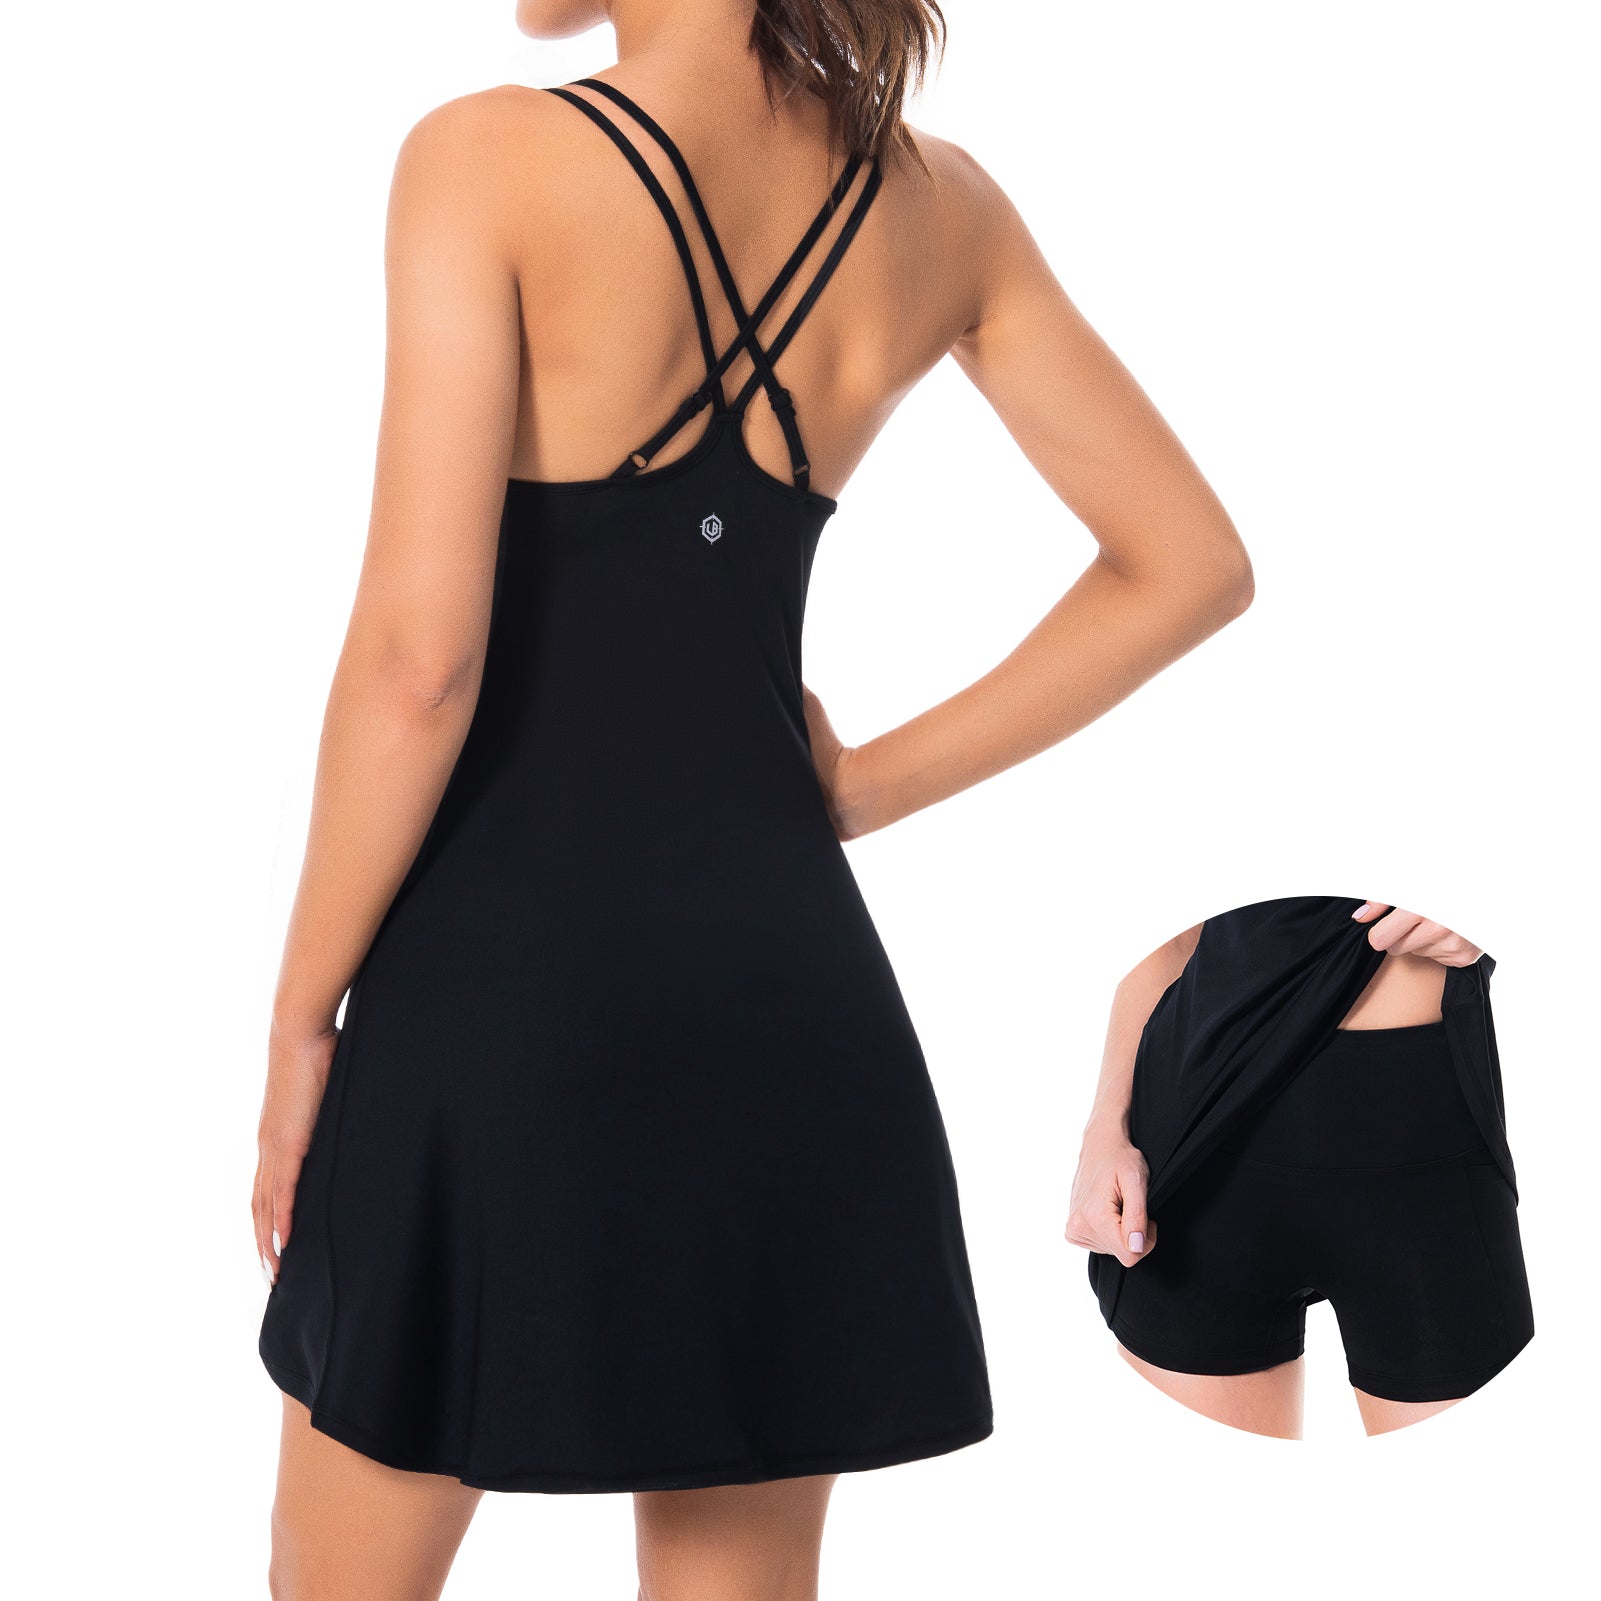 XIUH Women's Casual Dress Women Workout Tennis Dress With Built In Bra  Shorts Shoulder Straps And Pockets Dress for Women Black L